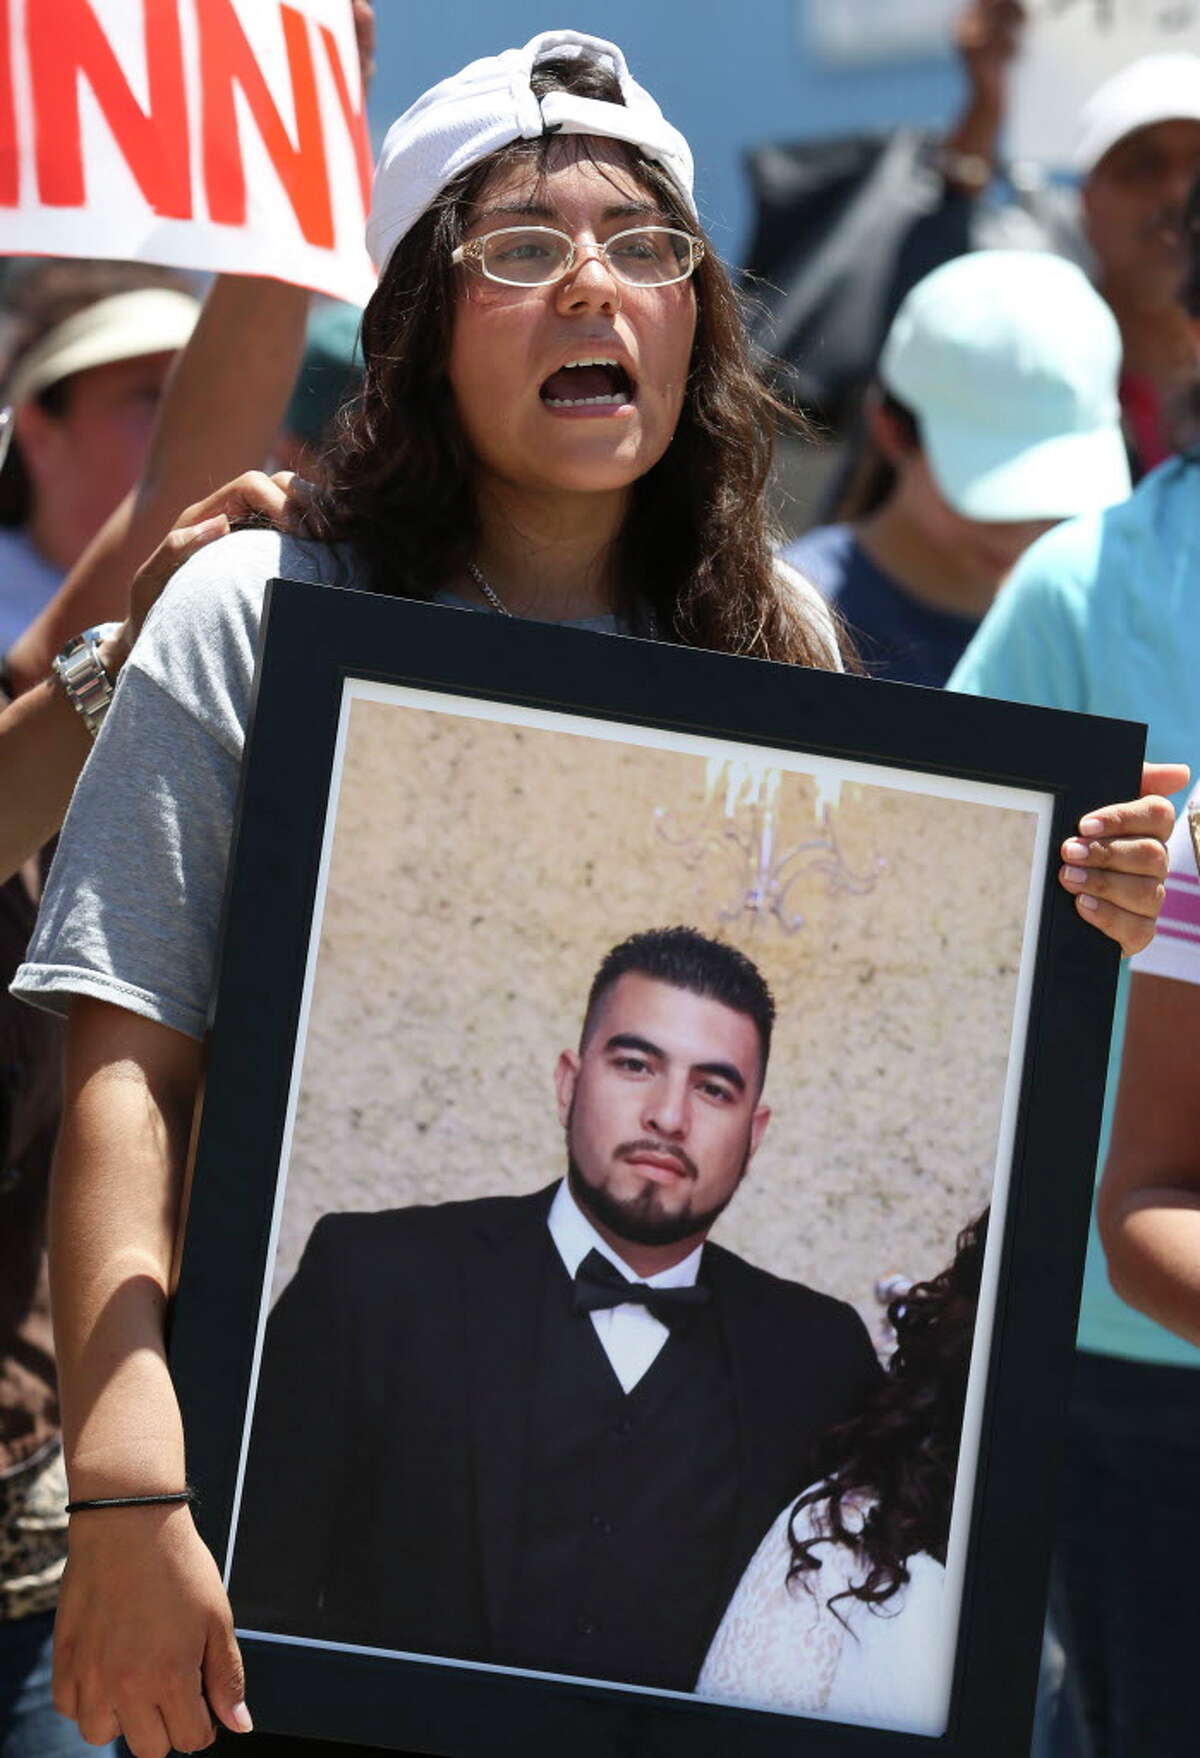 Maria Toval, wife of deceased John Hernandez, holds a photograph of Hernandez while marching from Guadalupe Plaza Park to to the Harris County Criminal Justice Center with more than a hundred protesters Wednesday, June 7, 2017, in Houston. Hernandez was killed by Terry Bryan Thompson, husband of Harris County Sheriff's Deputy Chauna Thompson, with a choke hold last week outside of a Denny's restaurant after the two got into a fight. Toval was also at the scene. The march was calling to seek justice for Hernandez.